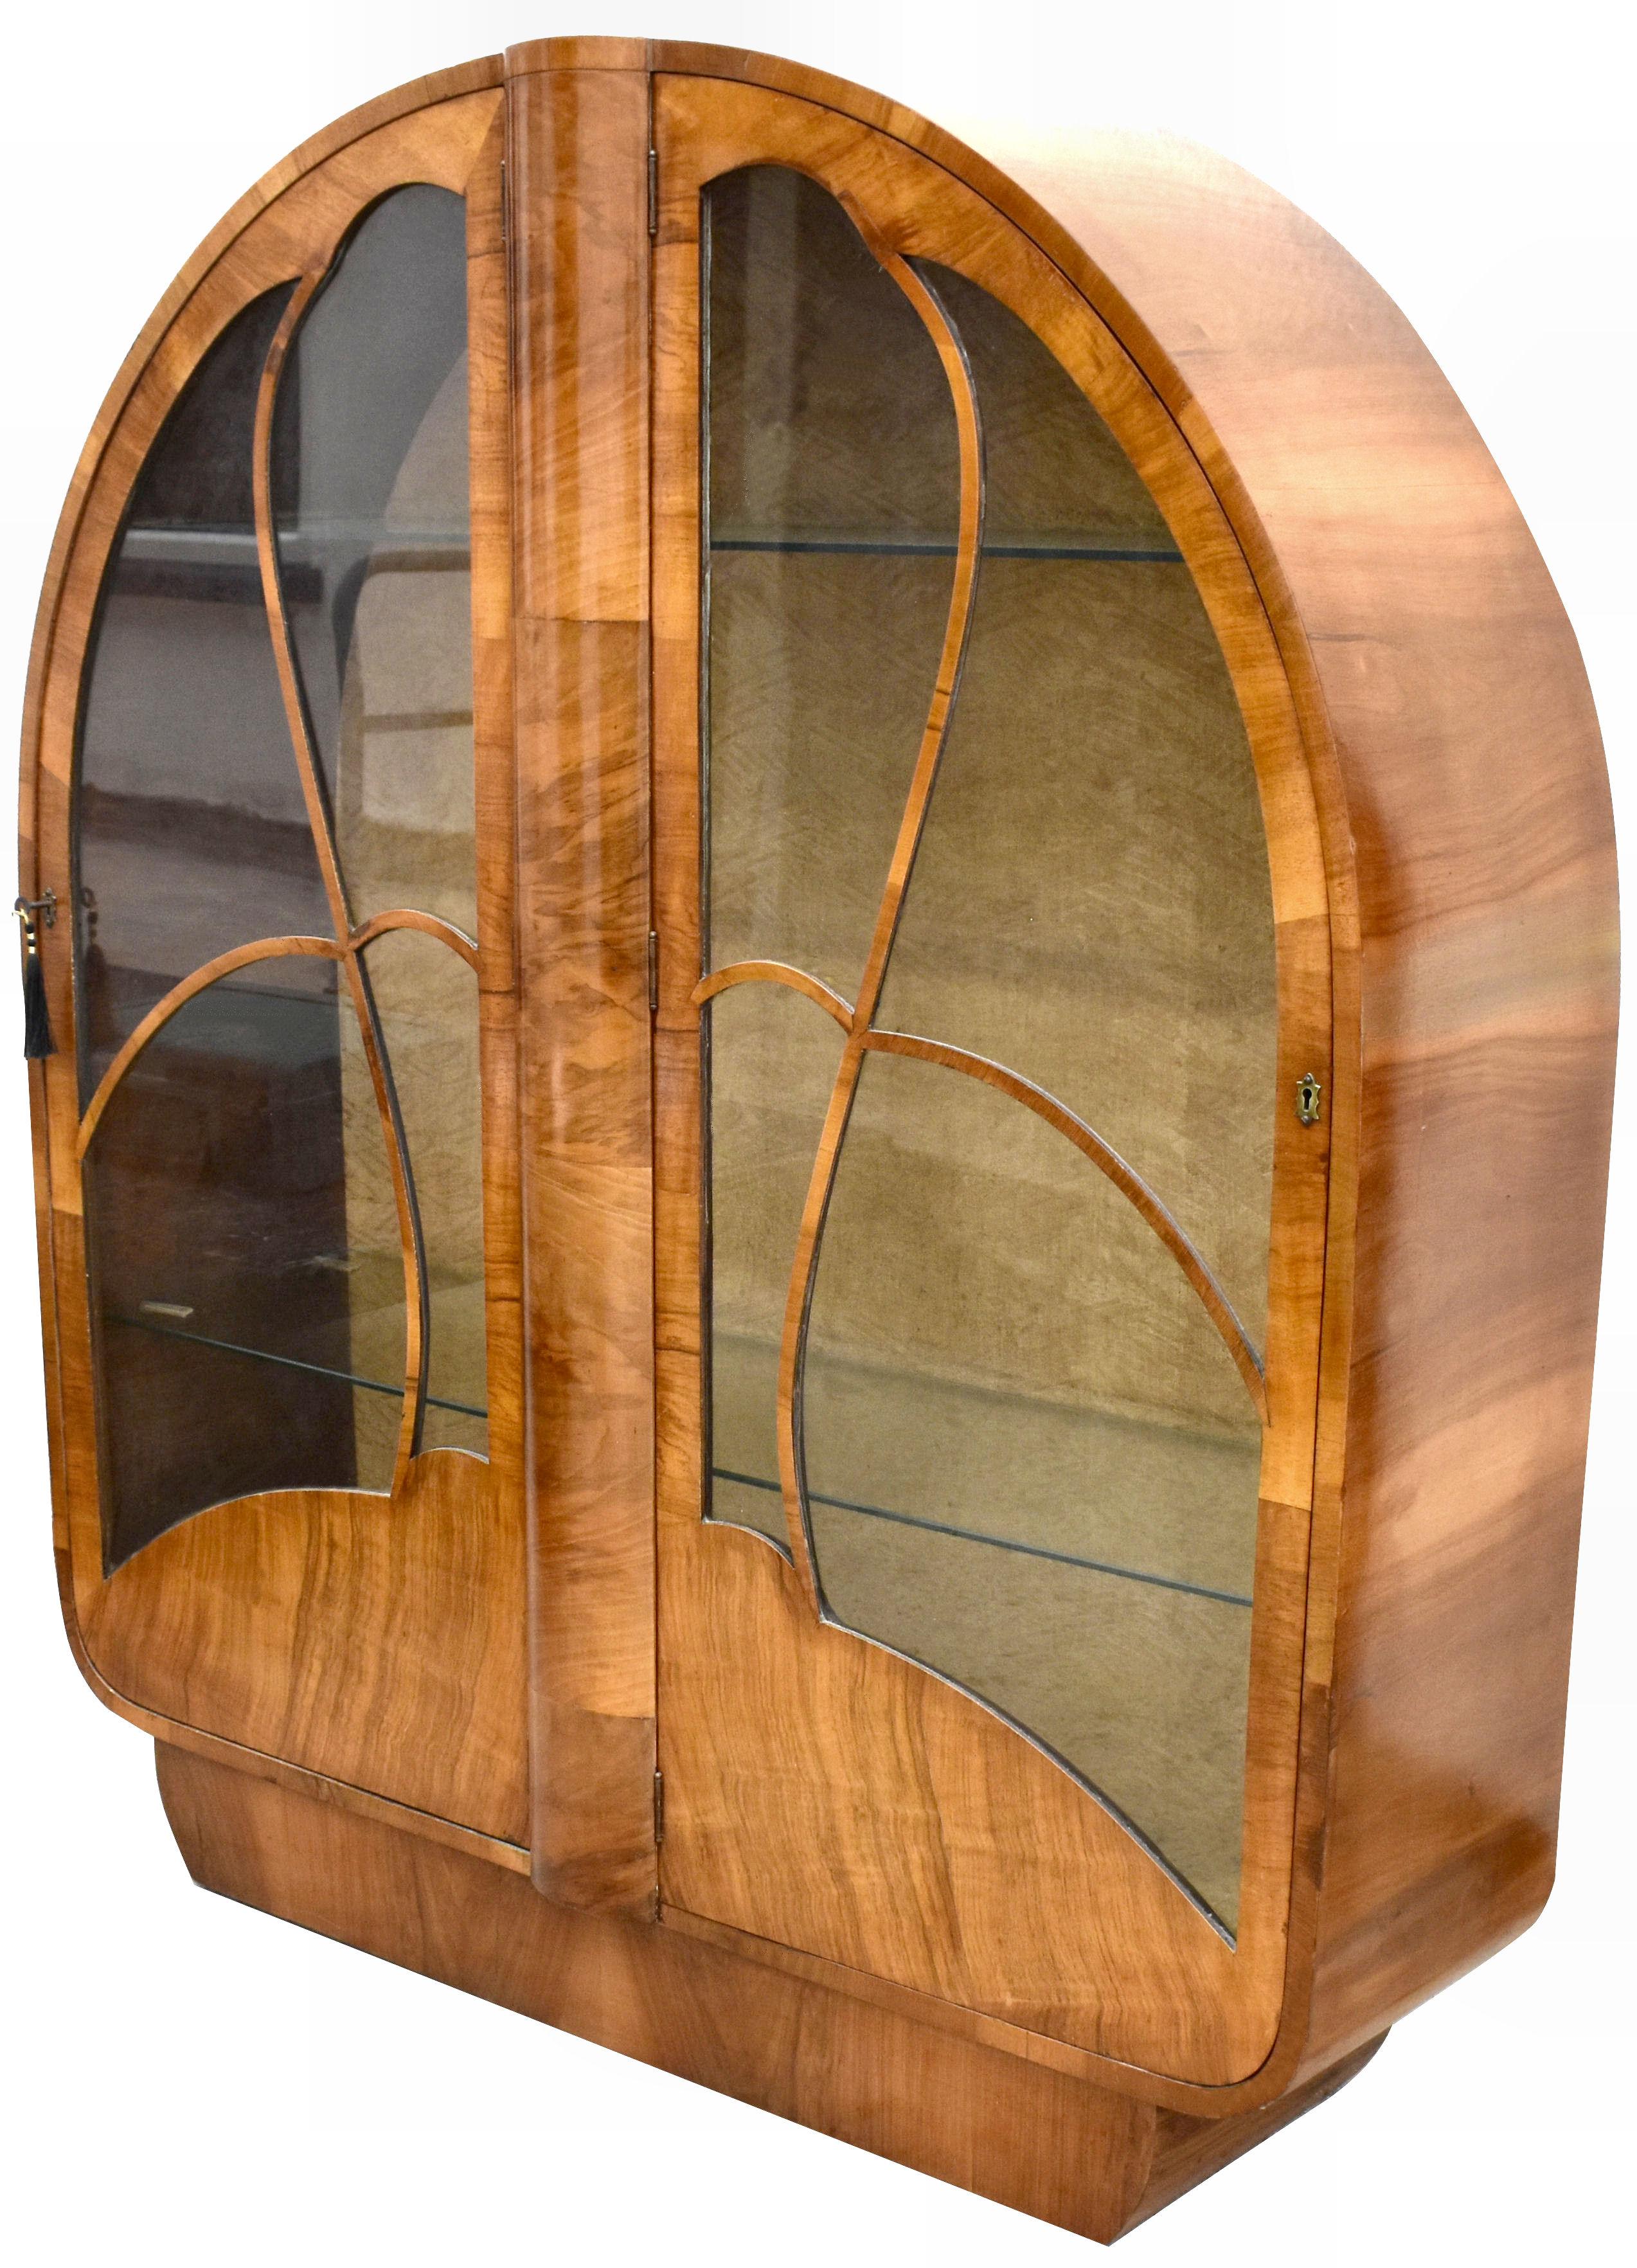 Beautiful and original 1930s Art Deco English walnut display cabinet. A lovely piece of furniture that's veneered in figured mid tone walnut. Still retains its original silk interior backing with a Deco pattern. Original keys which work smoothly to